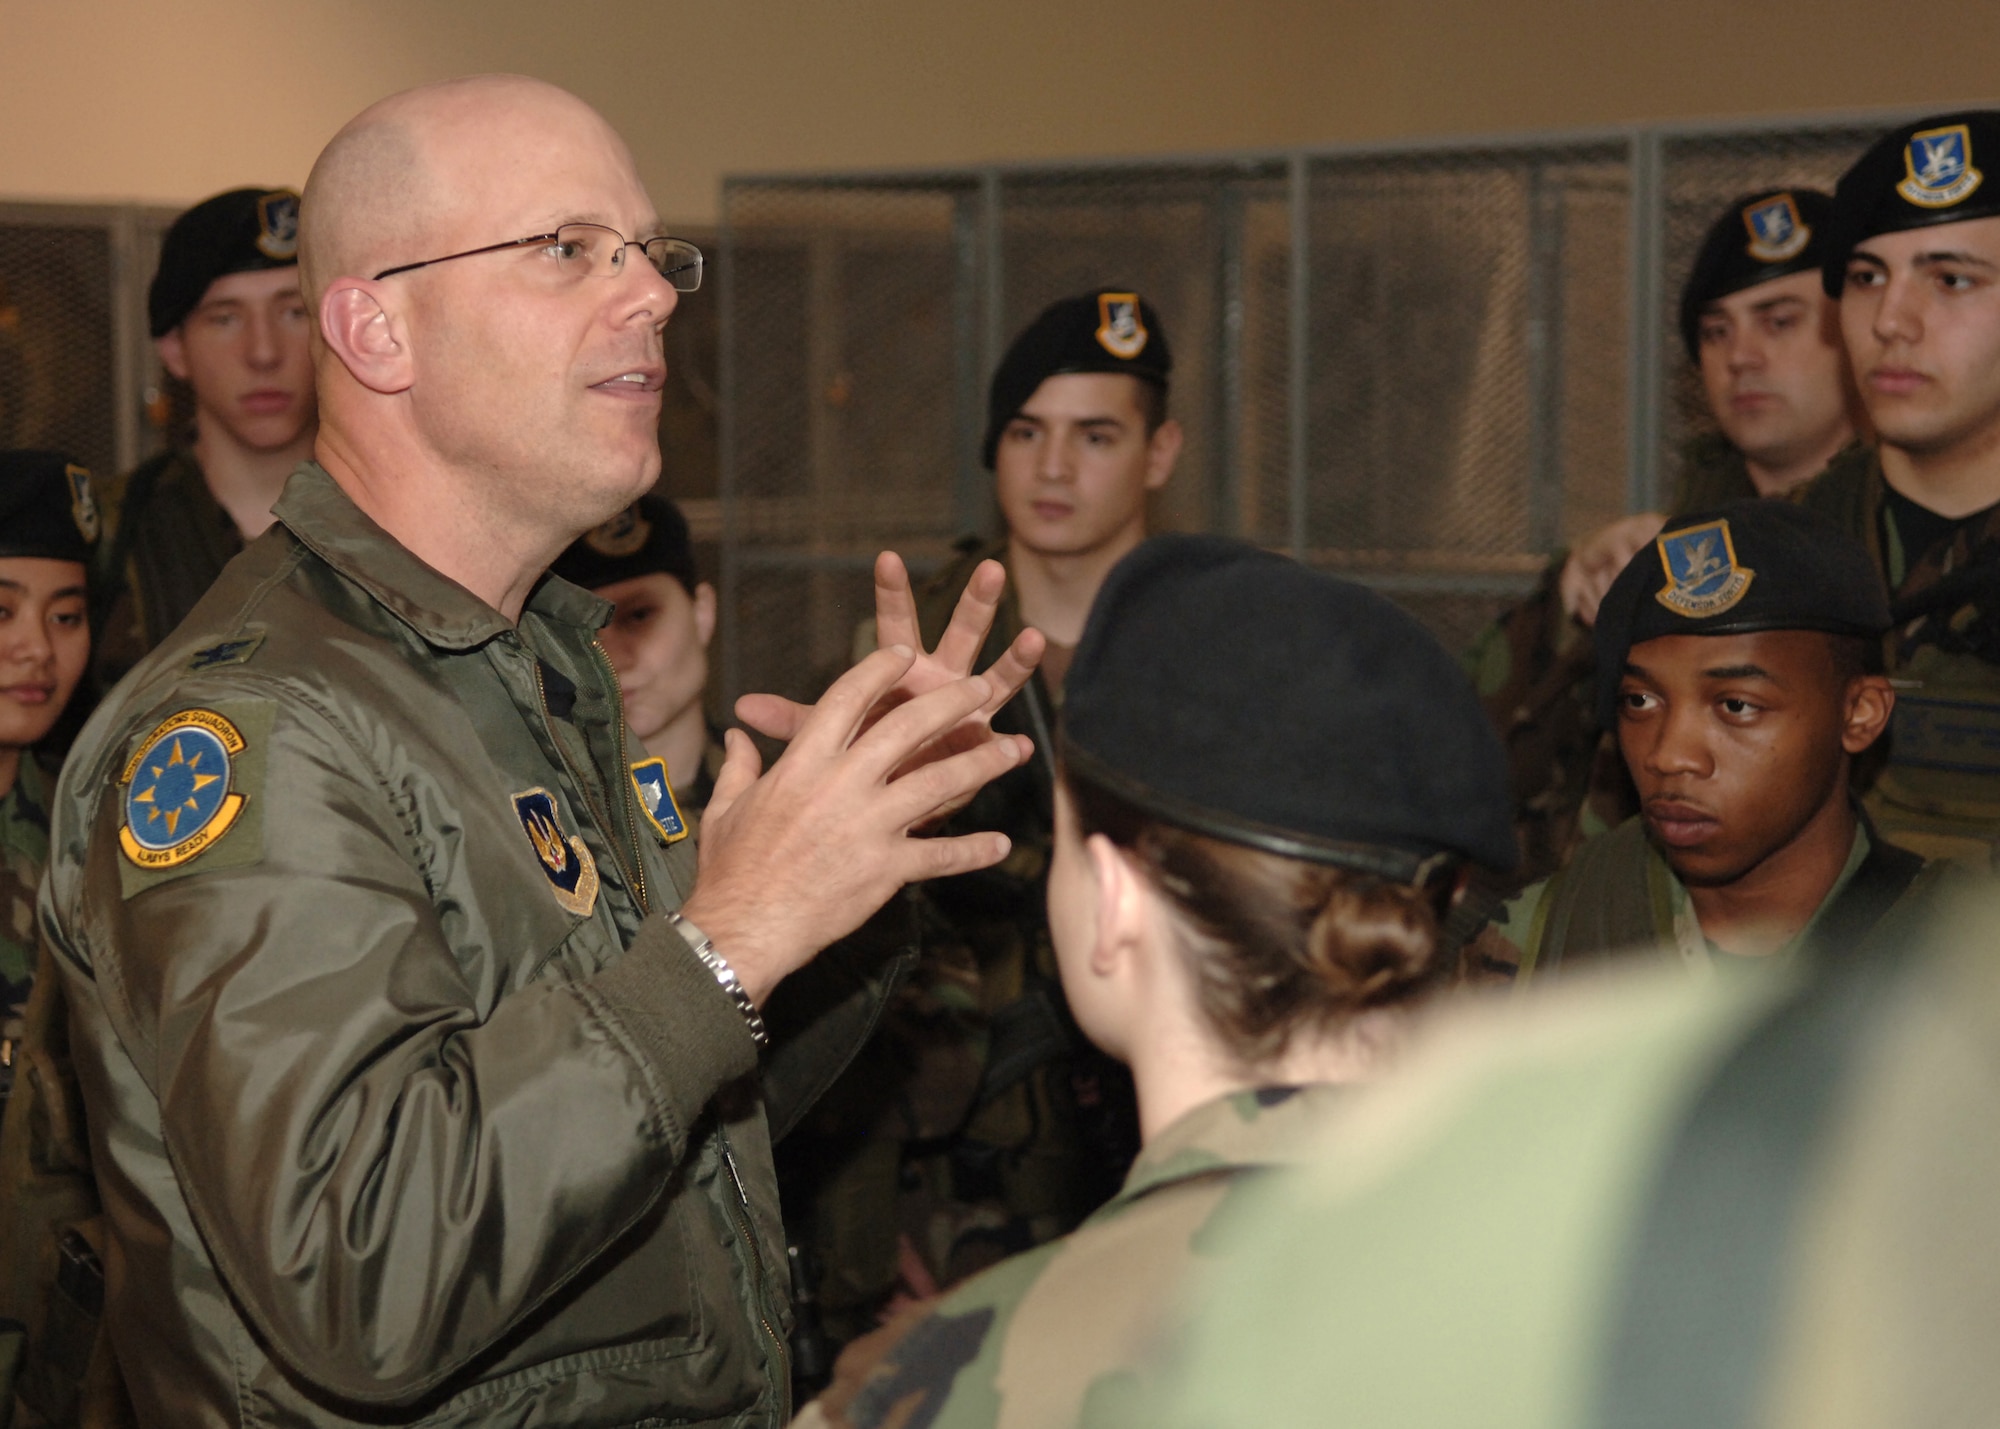 INCIRLIK AIR BASE, Turkey - Col. "Tip" Stinnette, 39th Air Base Wing commander, congratulates the 39th Security Forces Squadron for being awarded best in the Air Force for large SFS at the Armory March 12.  (U.S. Air Force photo by Airman First Class Nathan W. Lipscomb)  